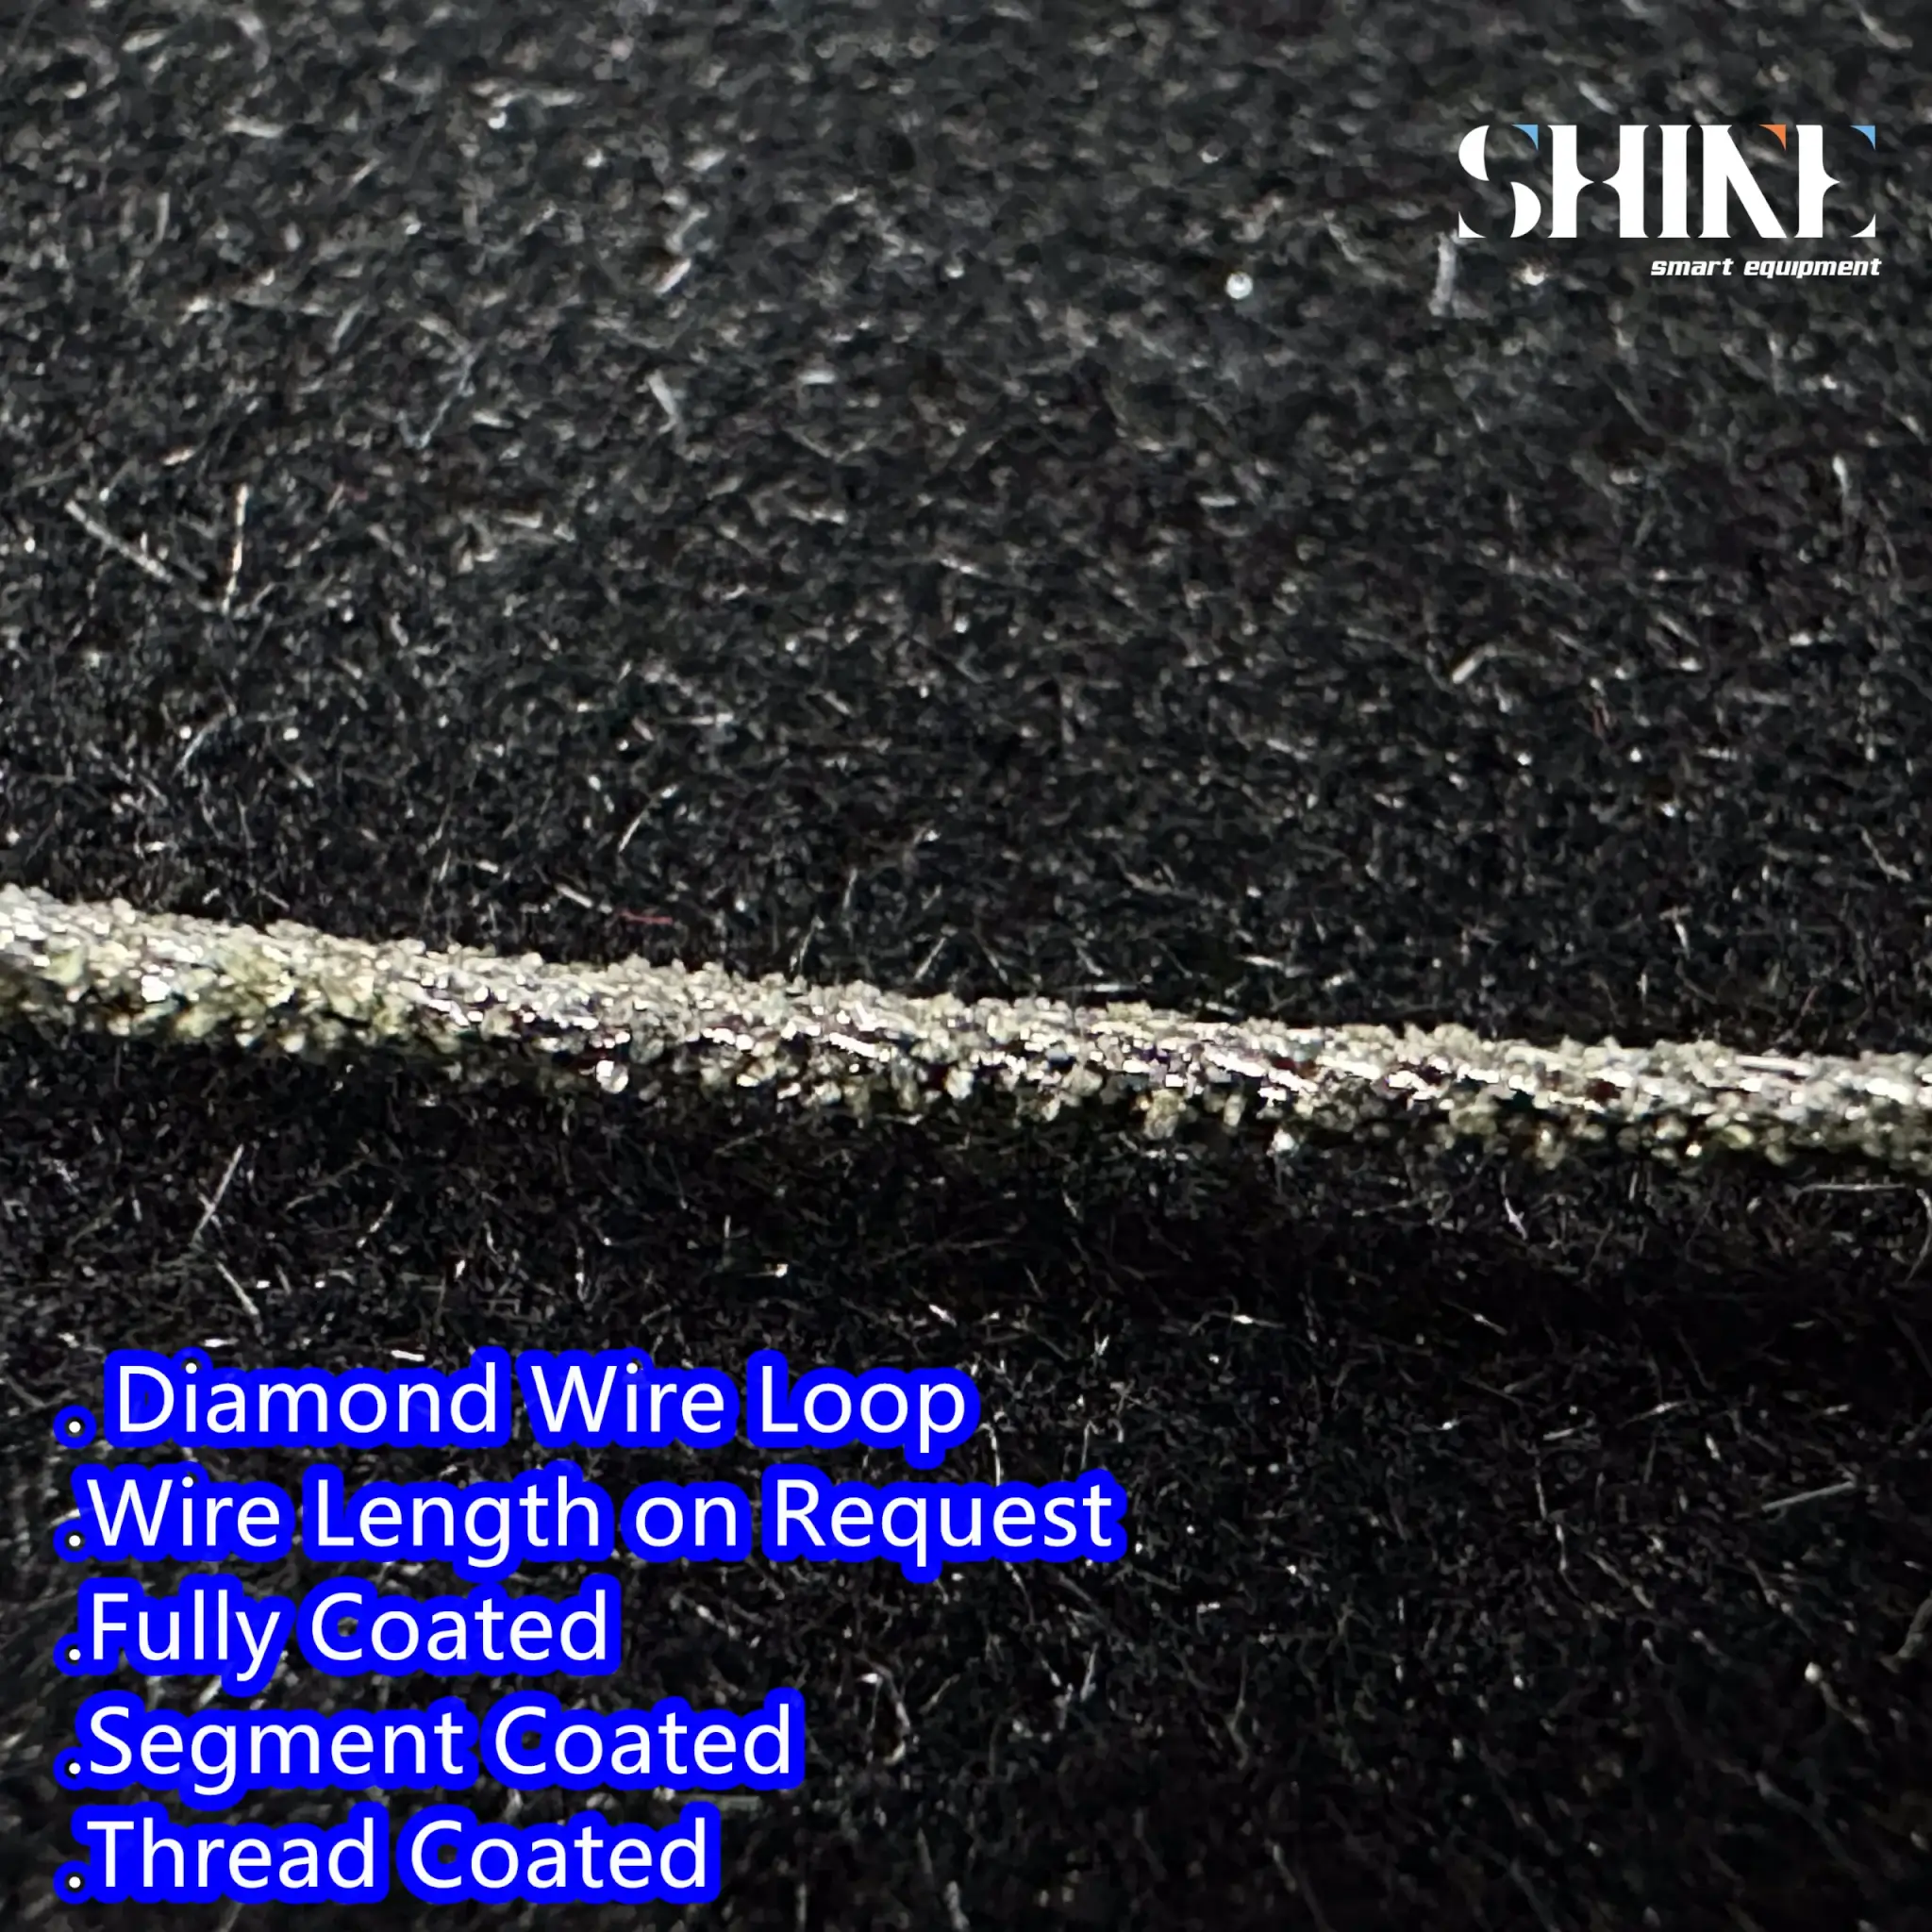 Electroplated diamond wire loop